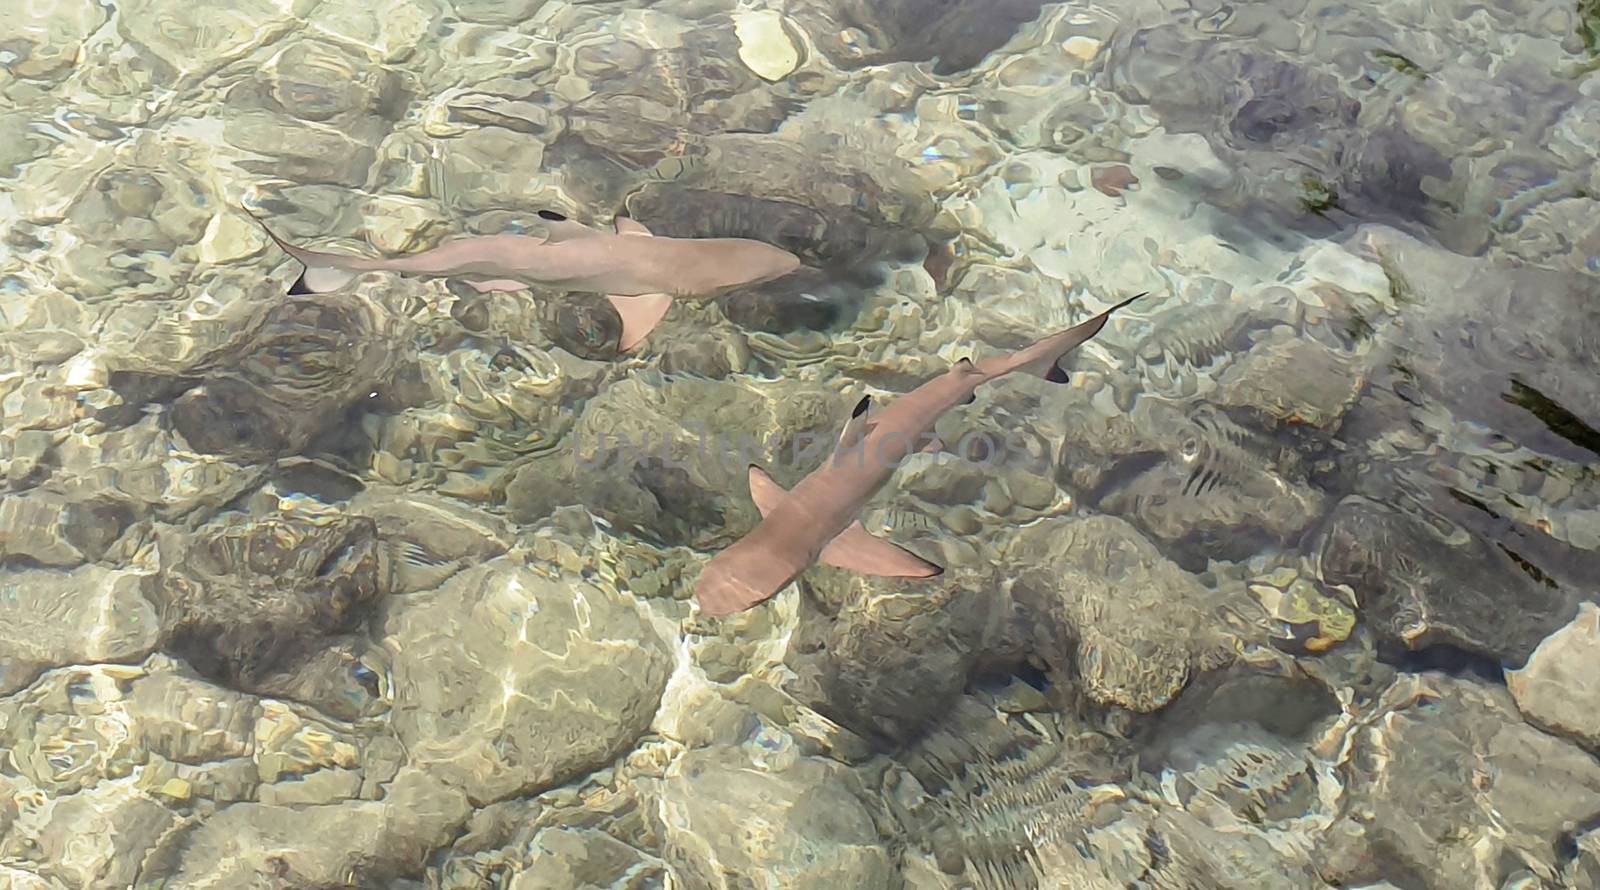 Reef sharks swim in shallow water